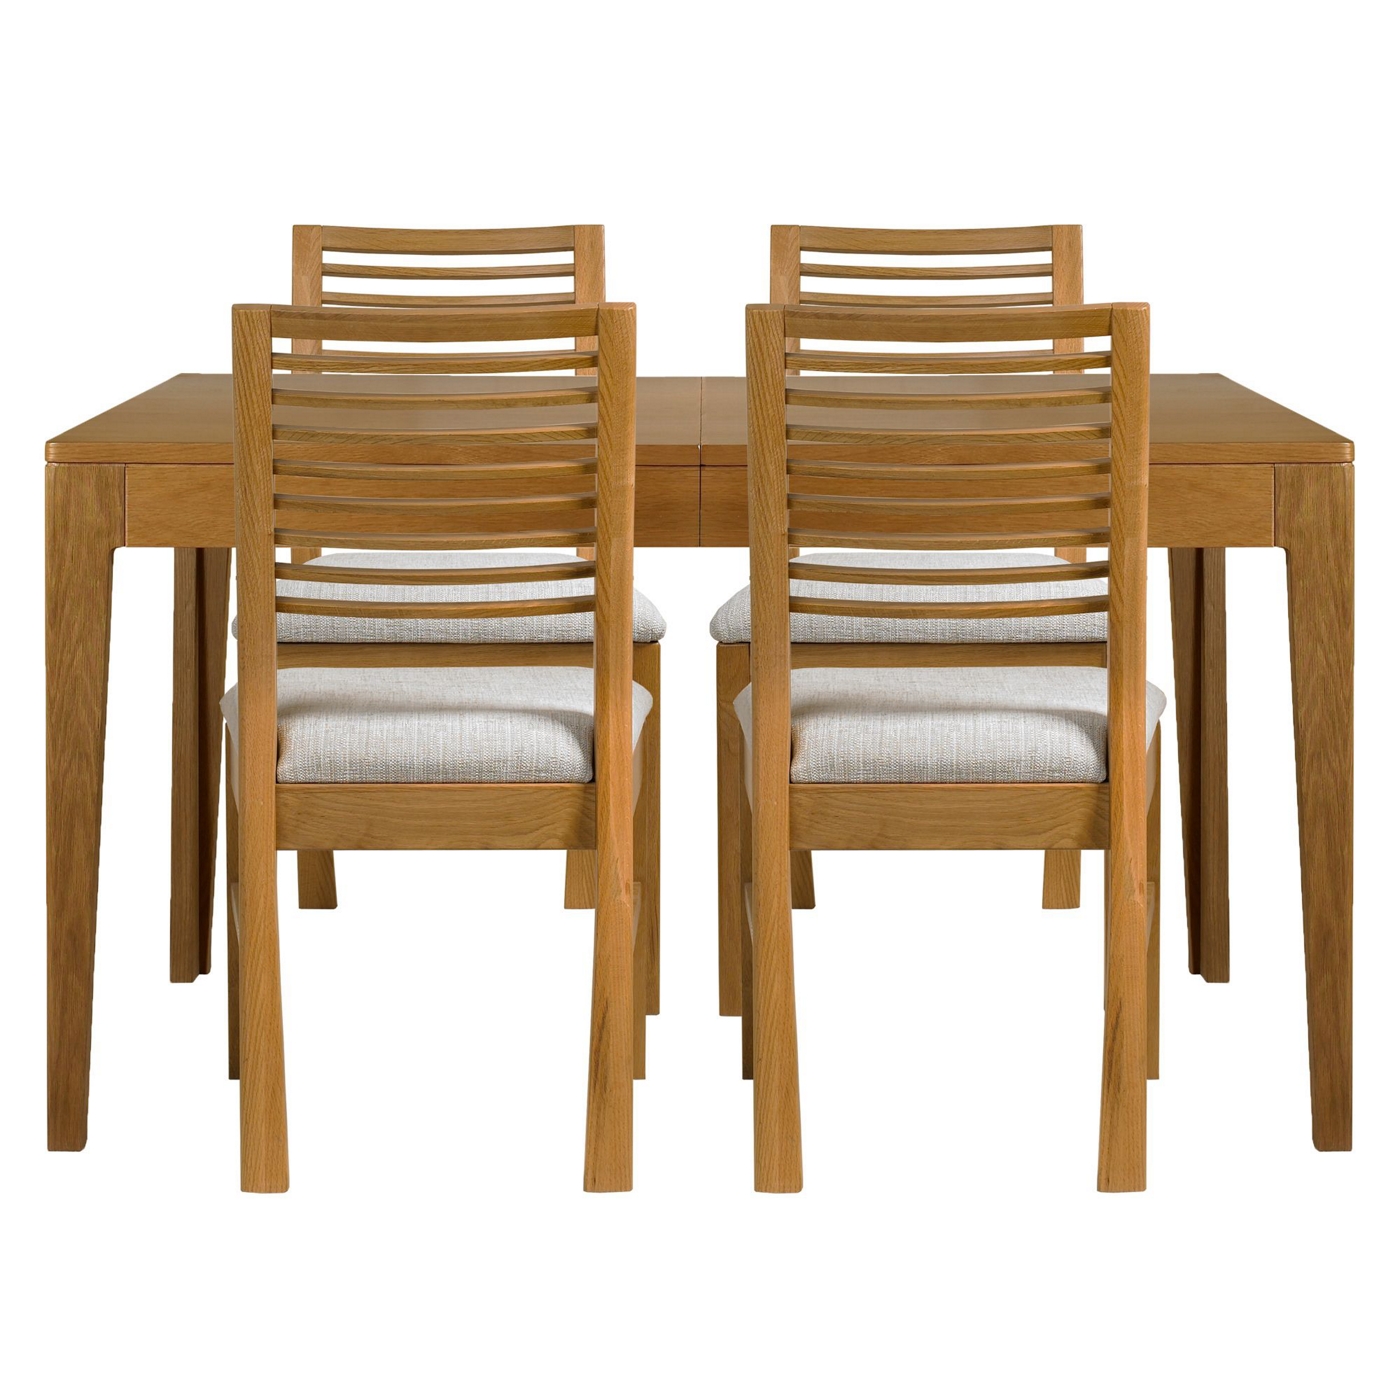 Oak Nord extending table and 4 chairs with cream fabric seats